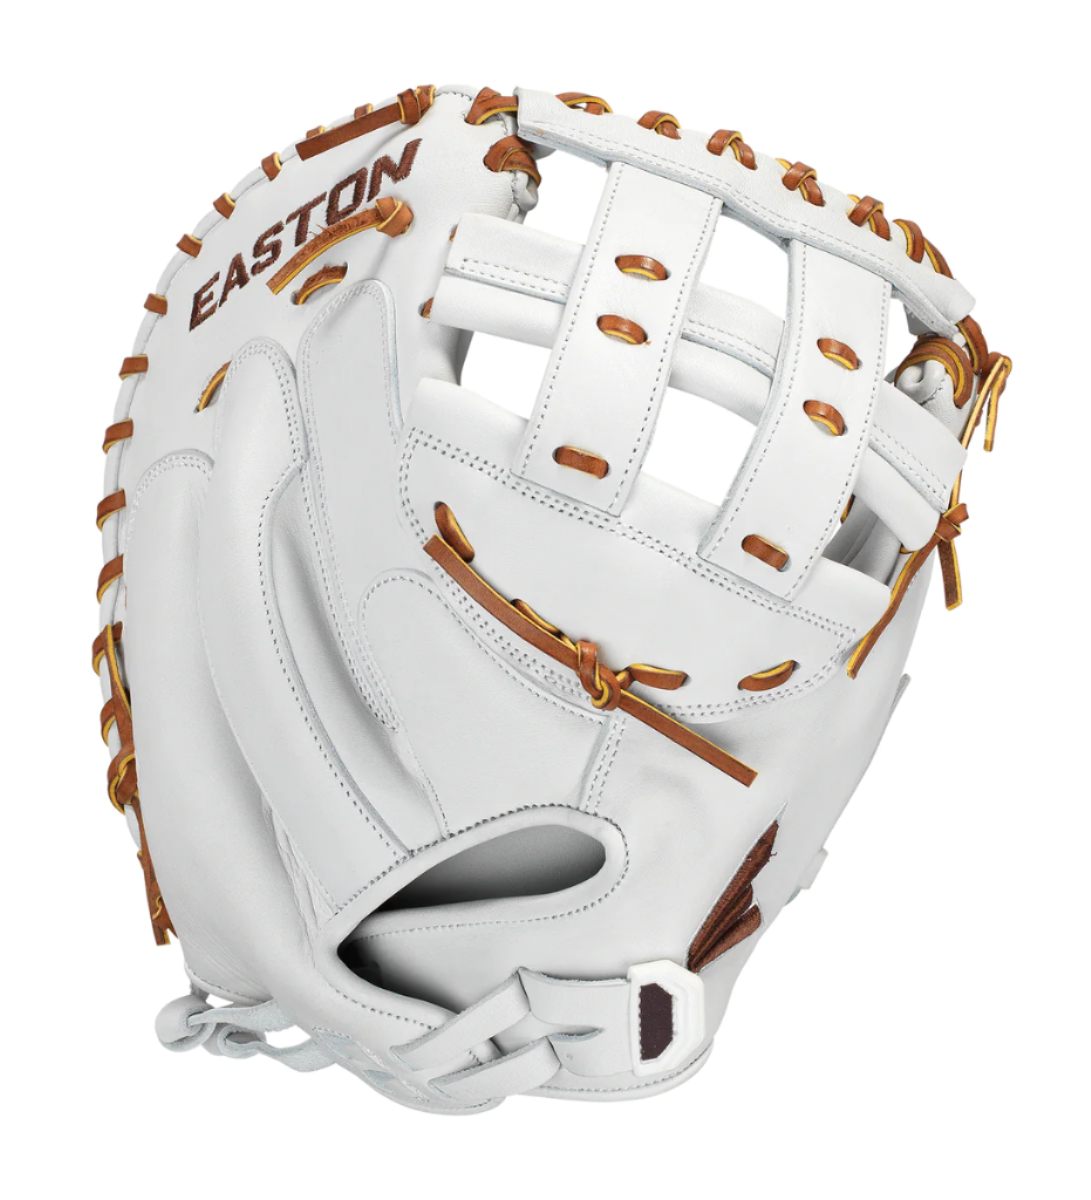 EASTON 34" PROFESSIONAL COLLECTION FASTPITCH PCFP234 FASTPITCH CATCHERS MITT RHT